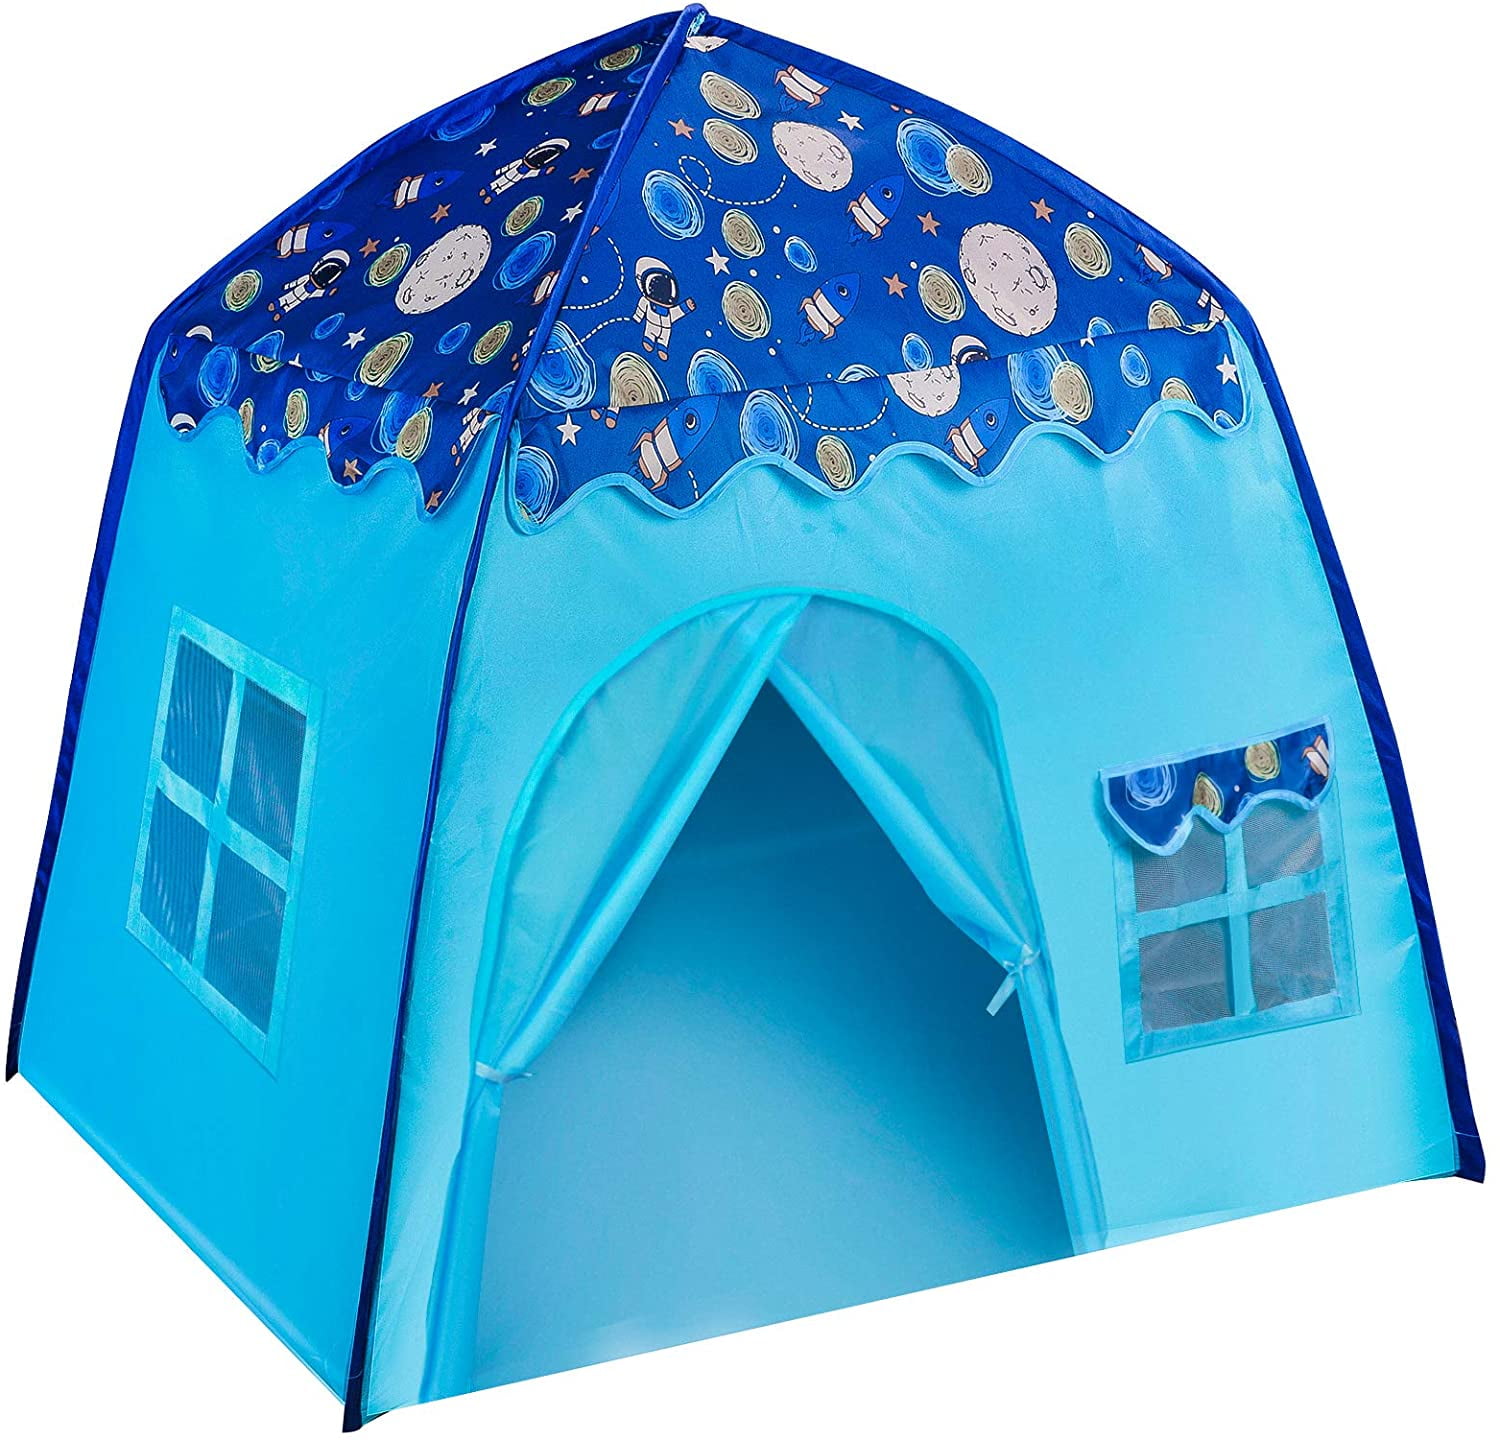 Premium Space Castle Pop Up Kids Playhouse by Wonder Space Comes with Portable Carrying Case Purple Best Indoor/Outdoor Gift for Boys and Girls Children Play Tent 